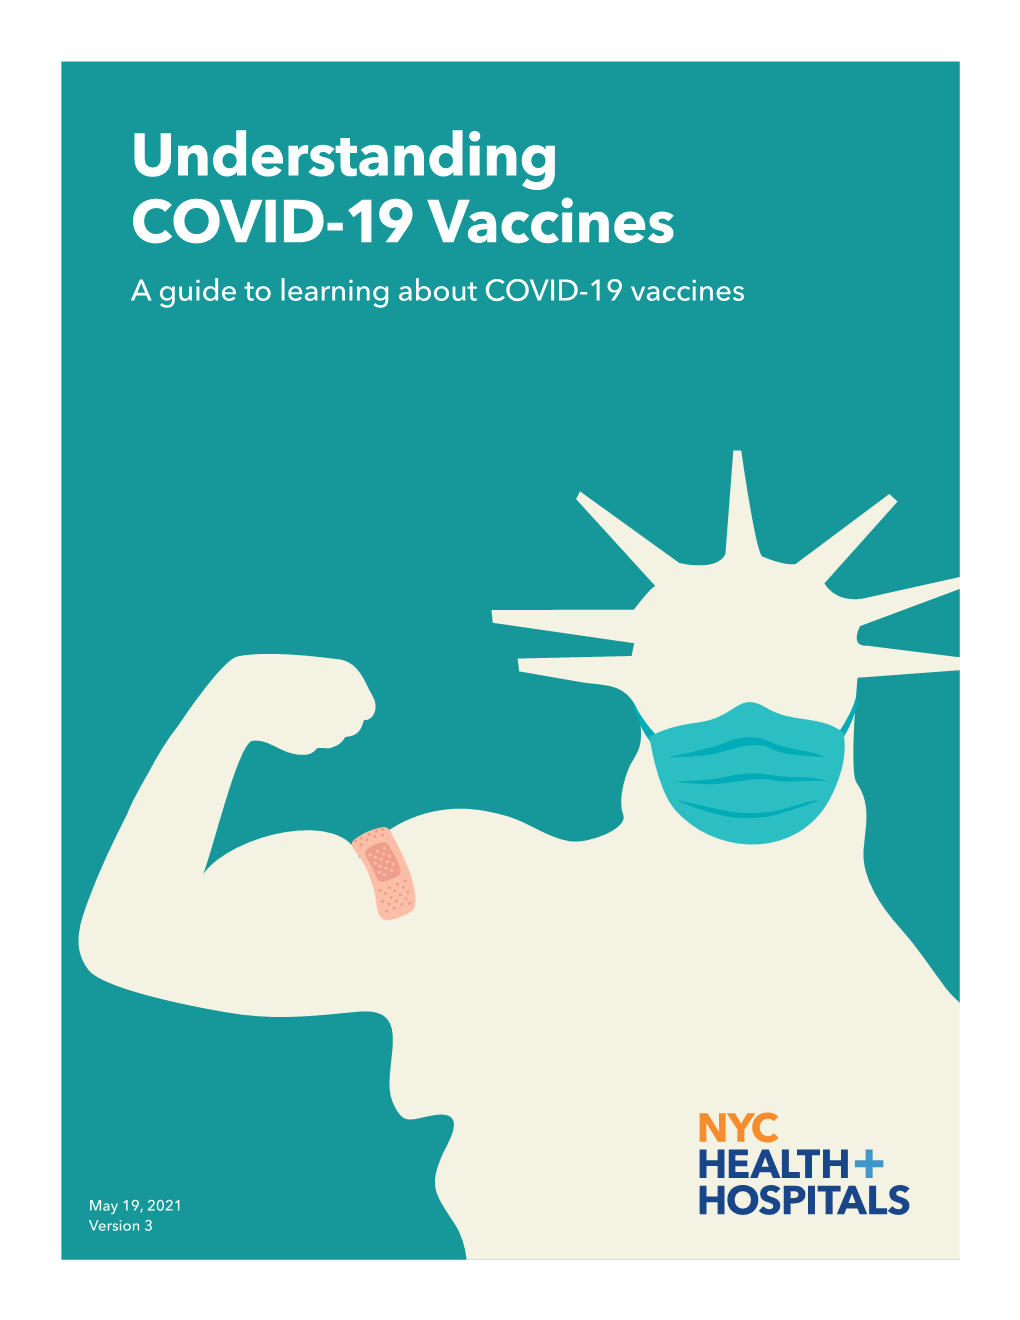 Understanding COVID-19 Vaccines a Guide to Learning About COVID-19 Vaccines